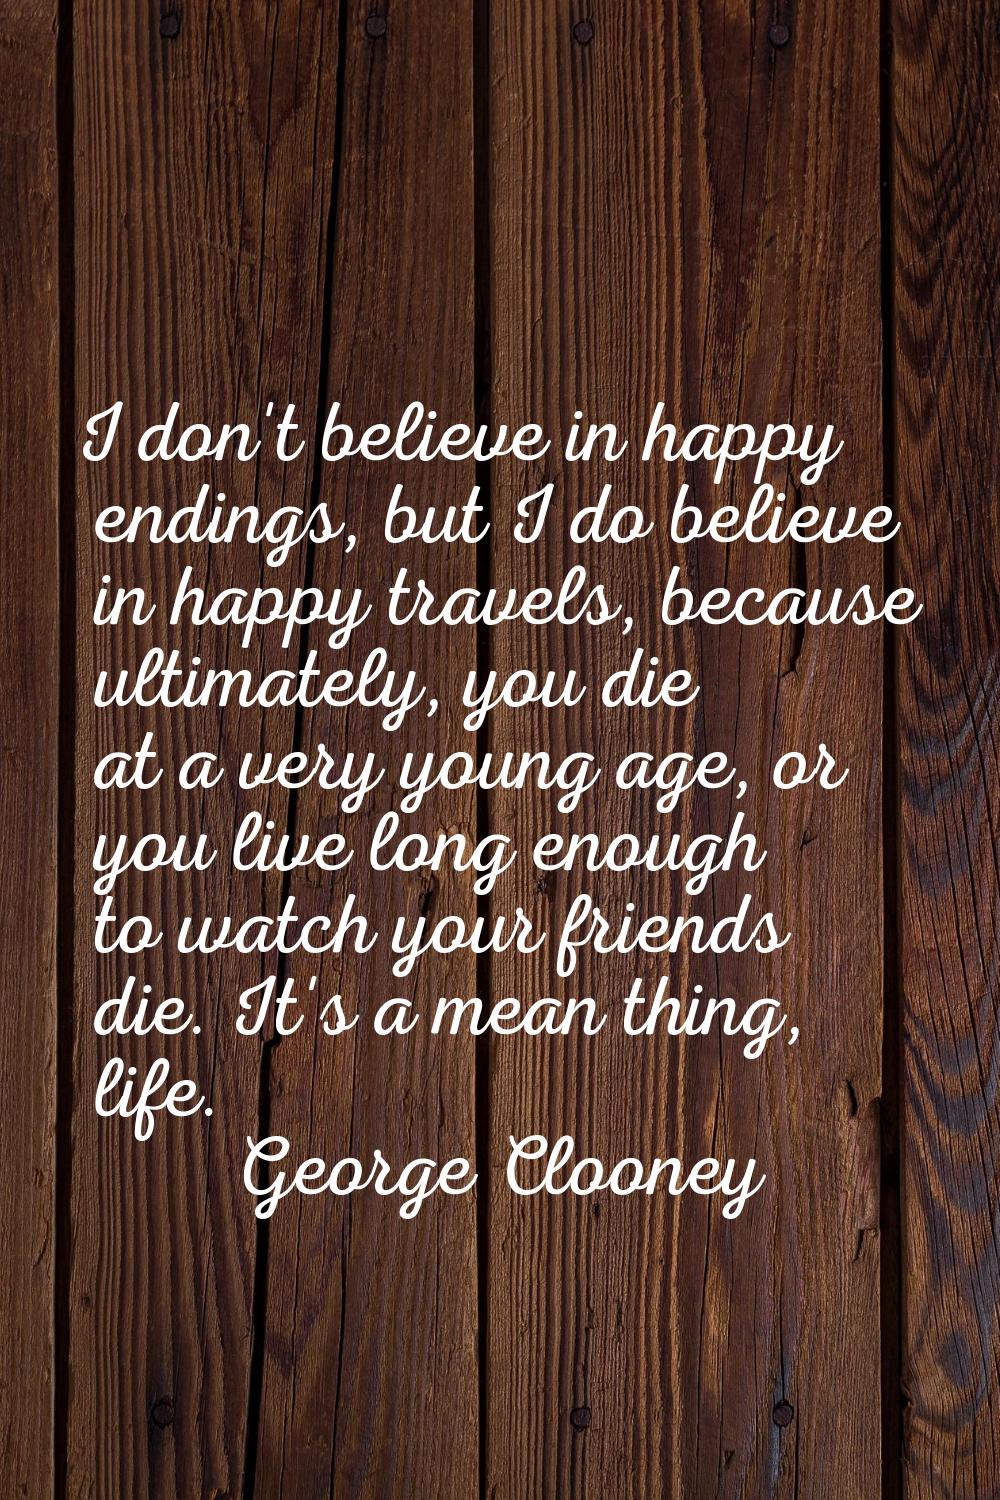 I don't believe in happy endings, but I do believe in happy travels, because ultimately, you die at